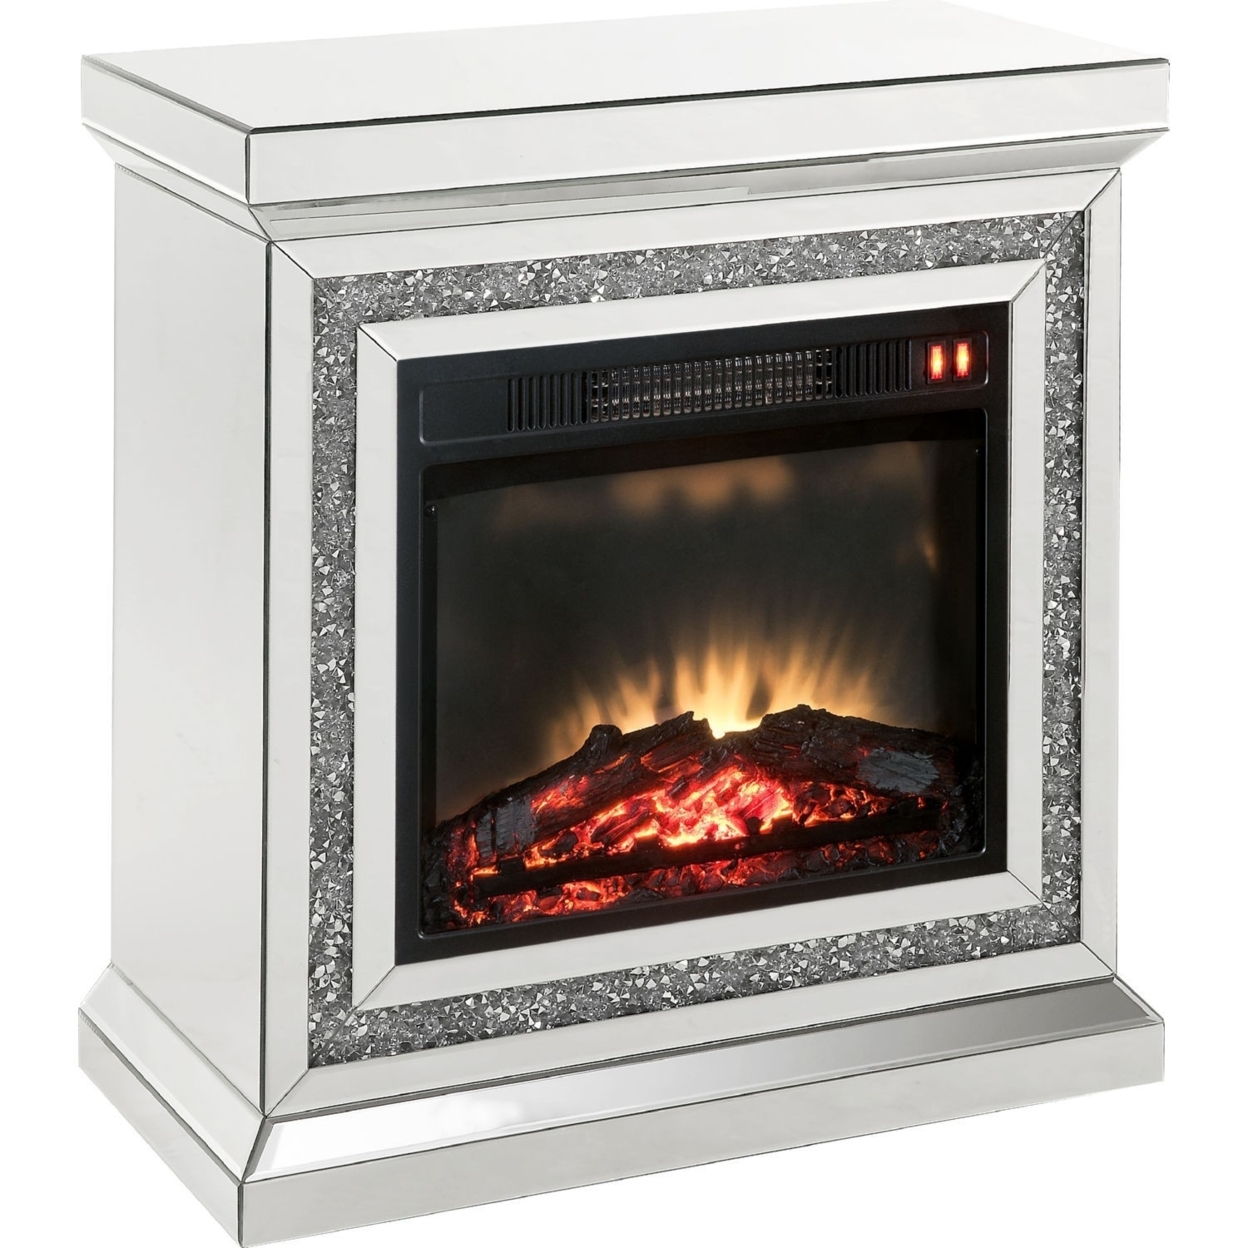 LED Fireplace With Remote Control And Mirrored Inserts, Silver- Saltoro Sherpi